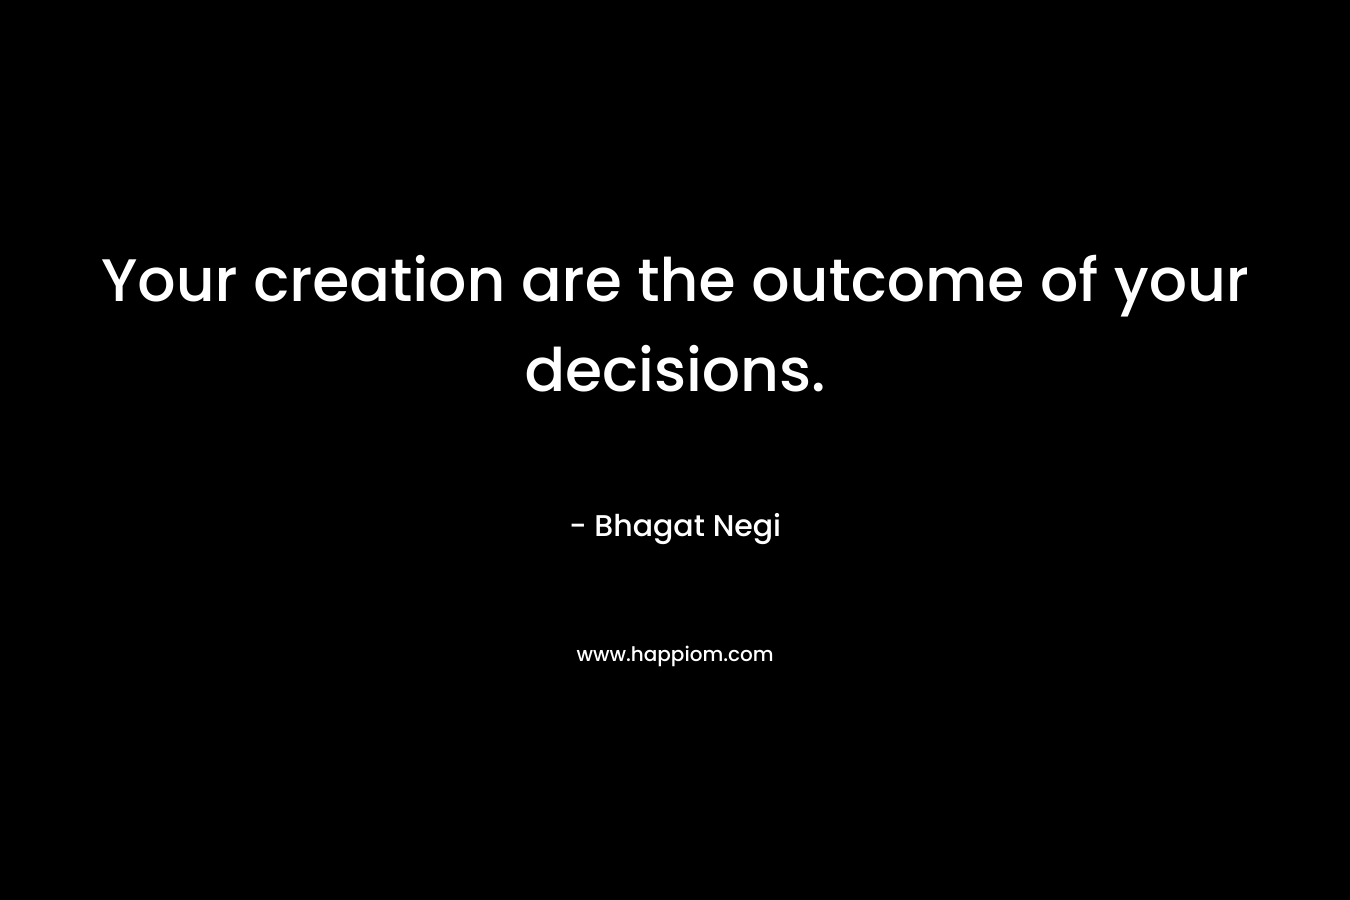 Your creation are the outcome of your decisions.